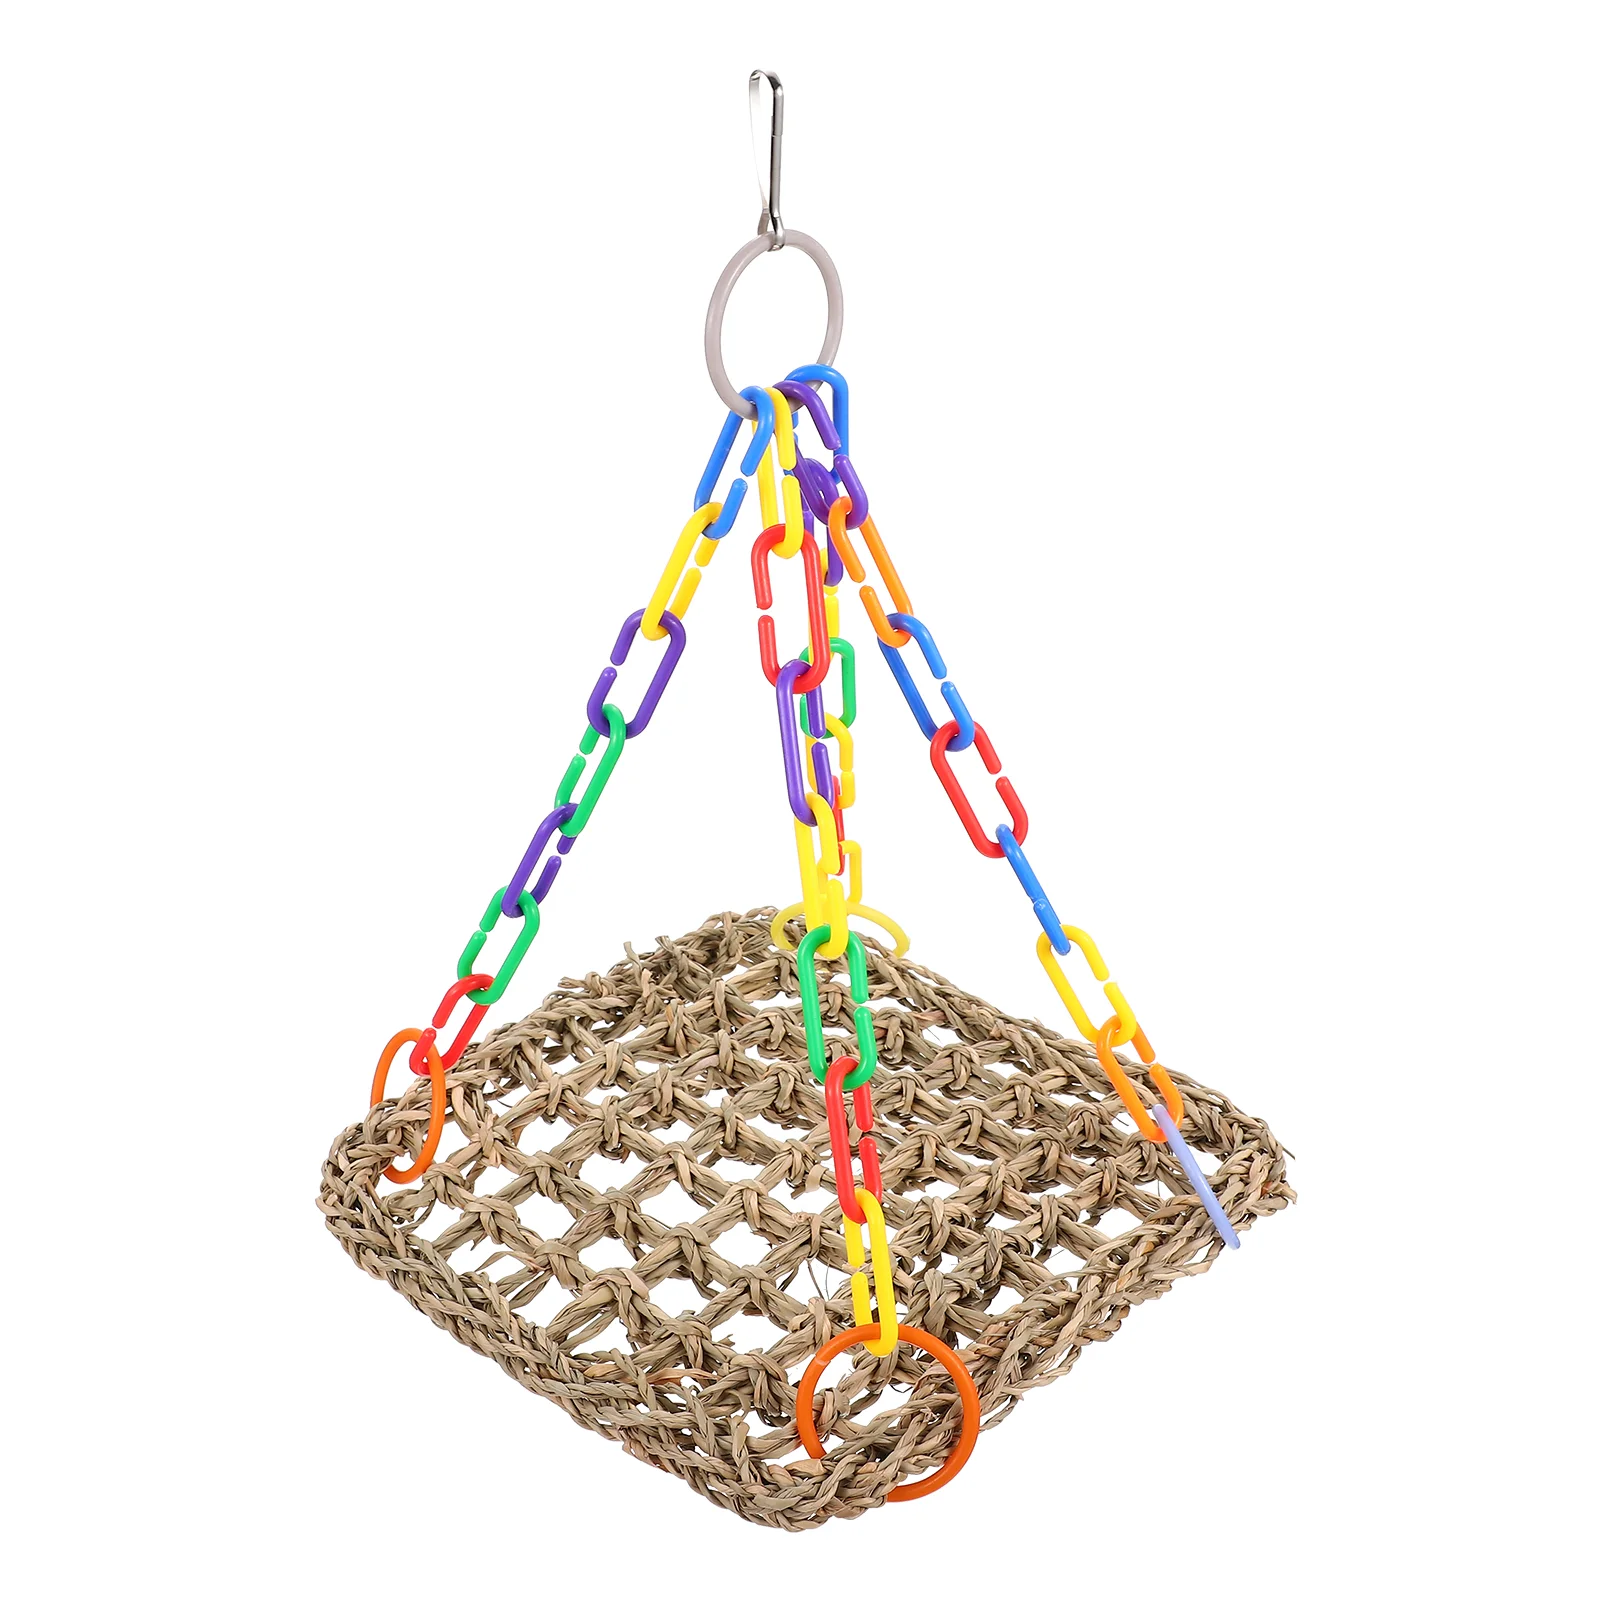 

Small Bird Cages Parakeets Parrot Swing Toy Biting Parrots Climbing Hanging Chew Chewing For birds and